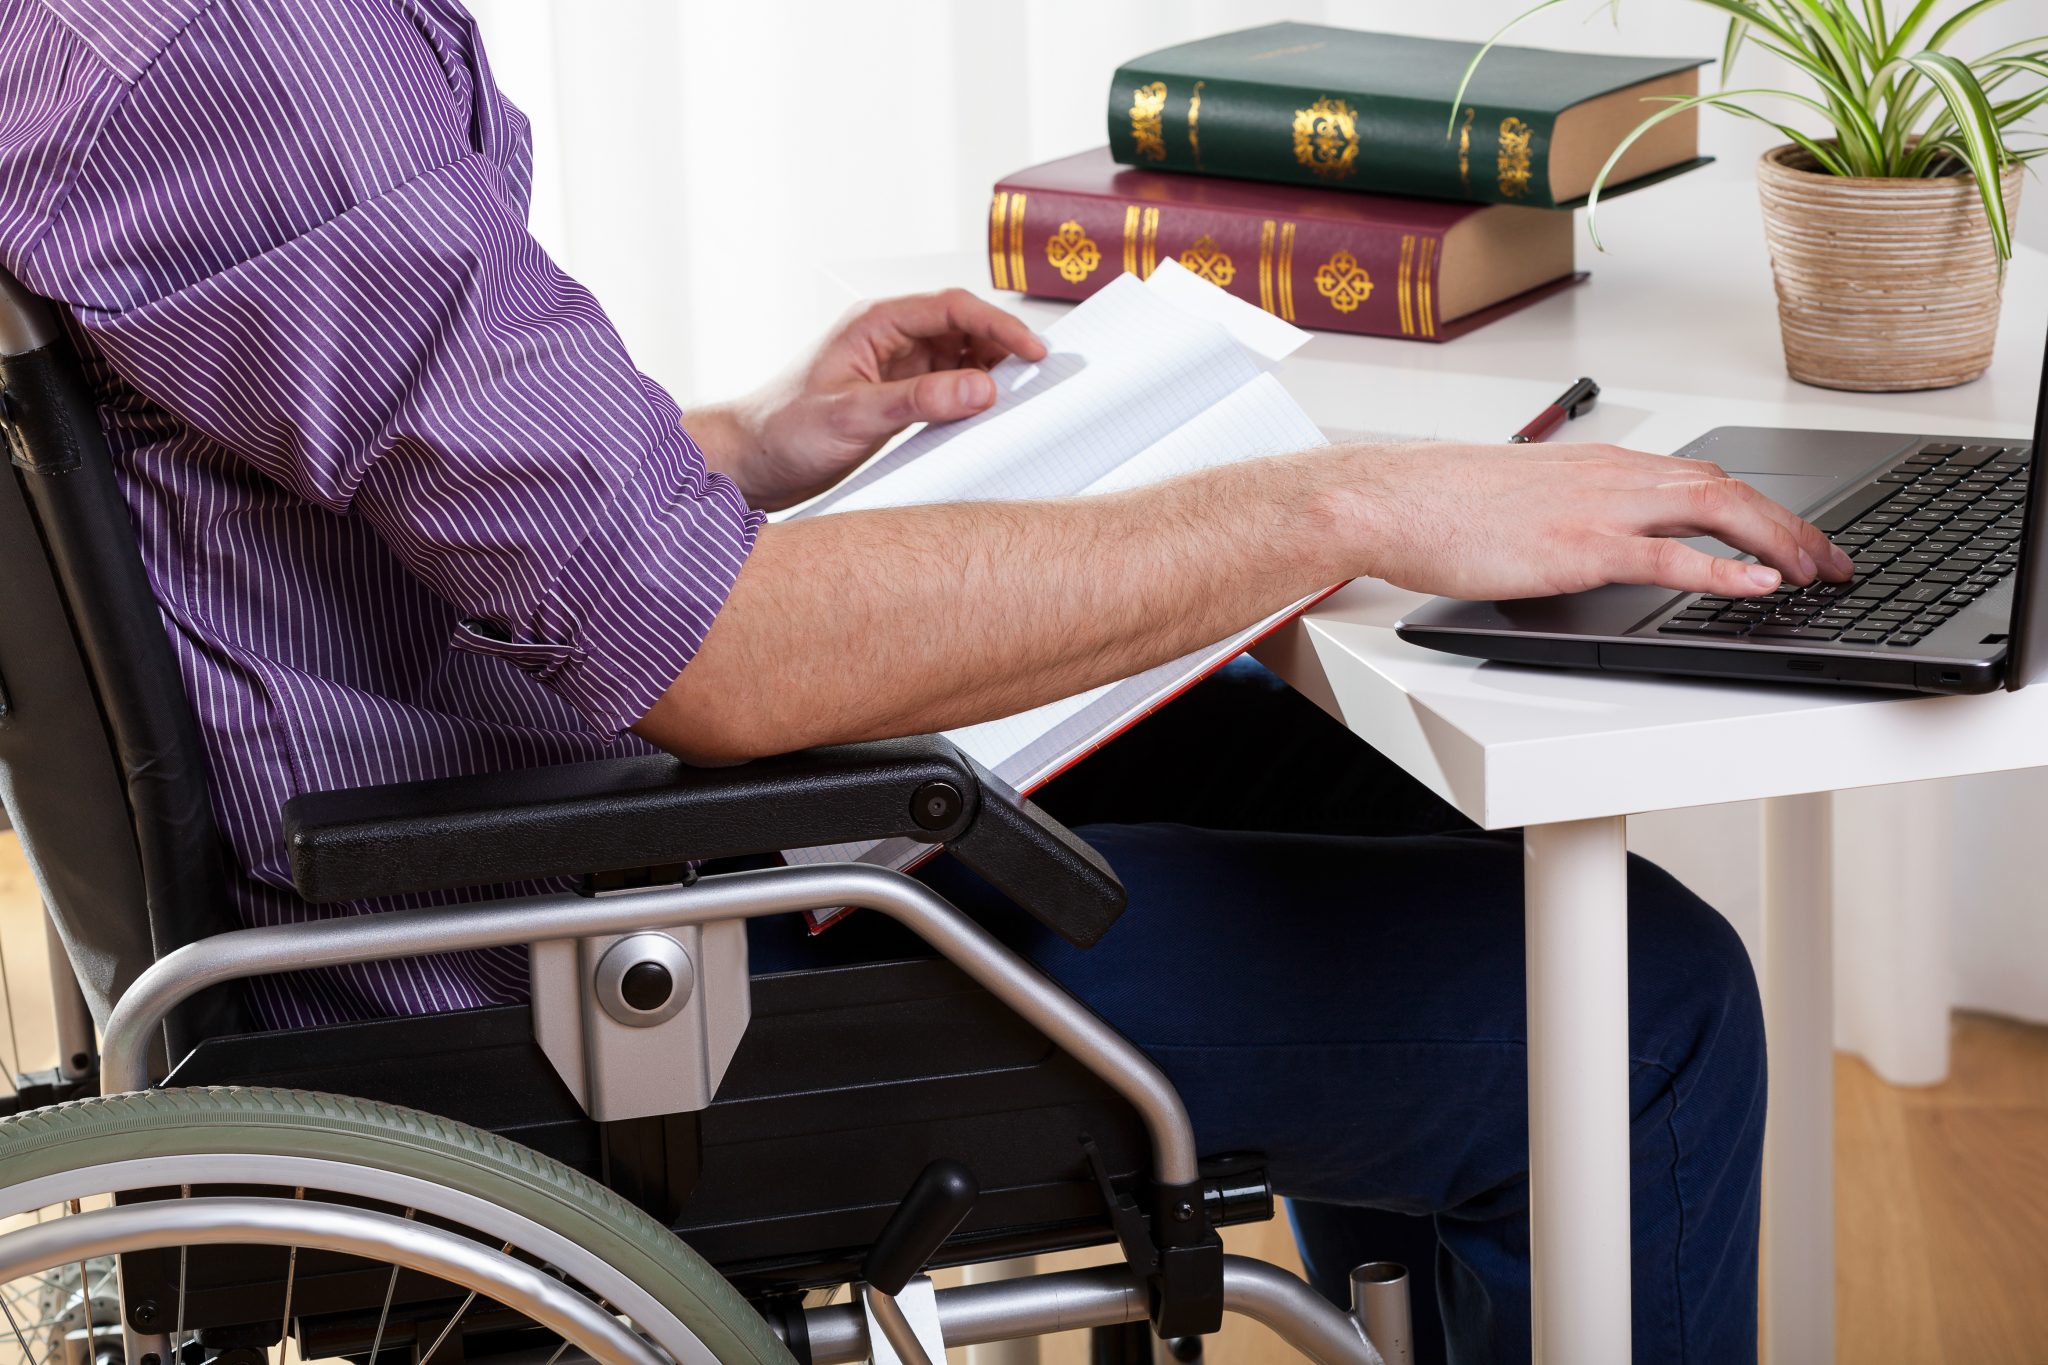 Assistive Technology for Disabilities